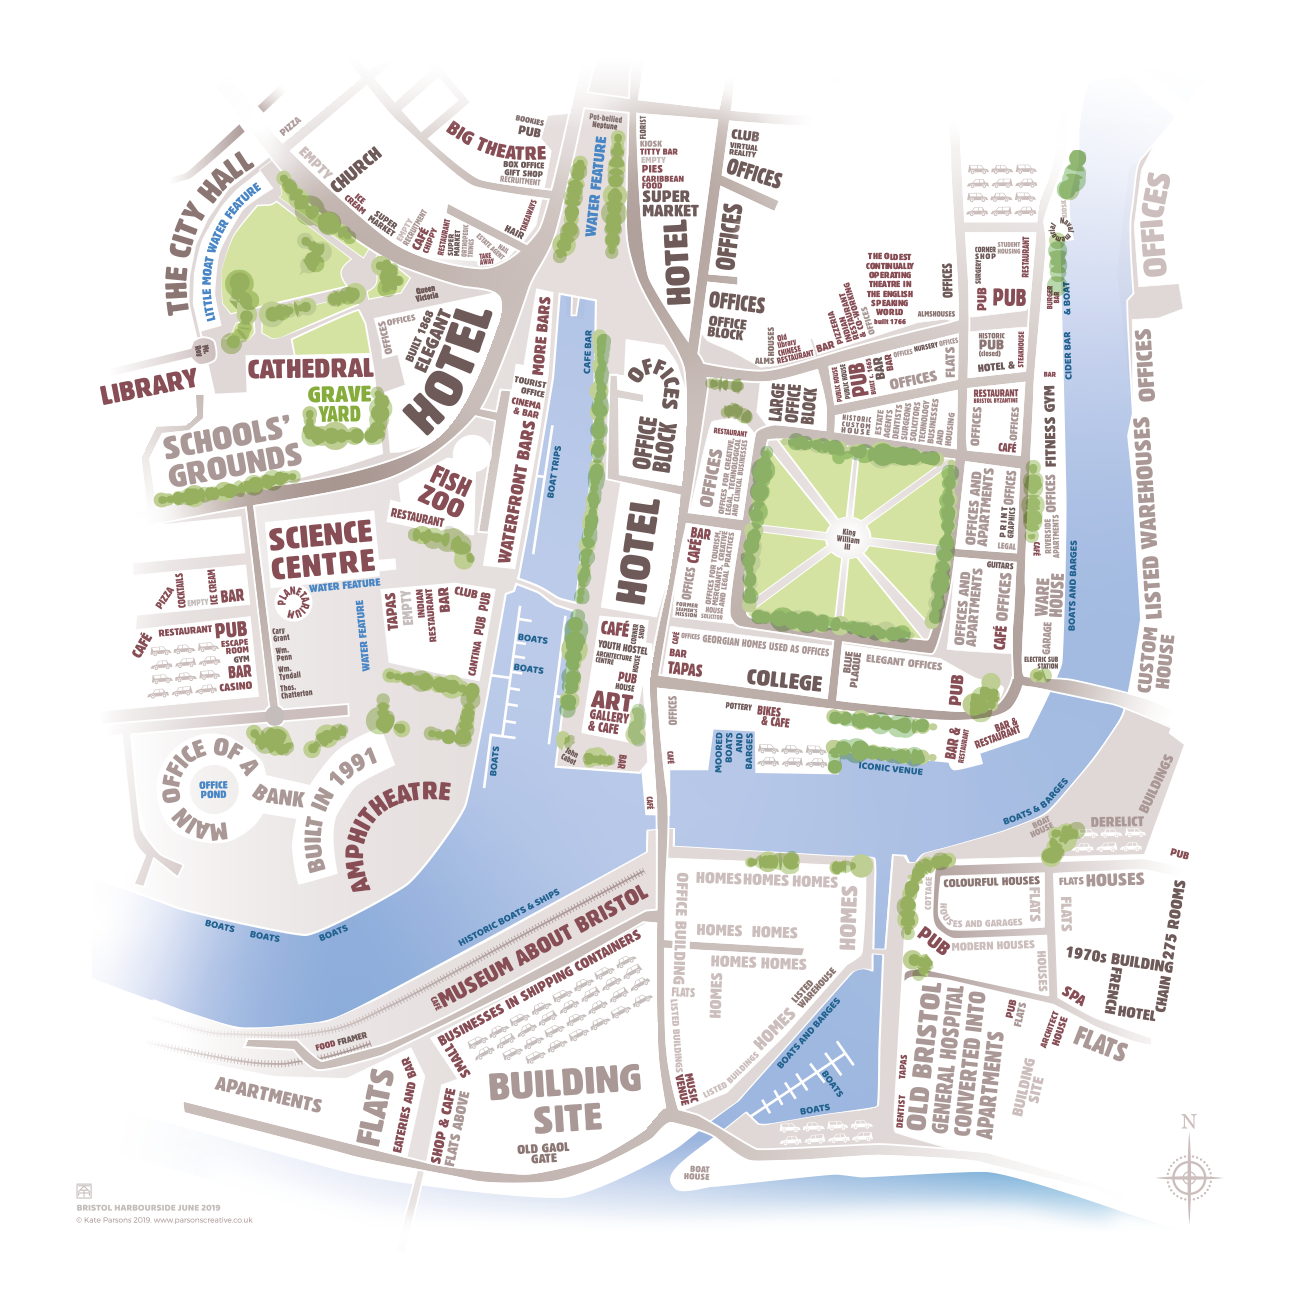 Harbourside, Bristol, Queen Square, Arnolfini, M-shed, Watershed, The Centre, typography, map